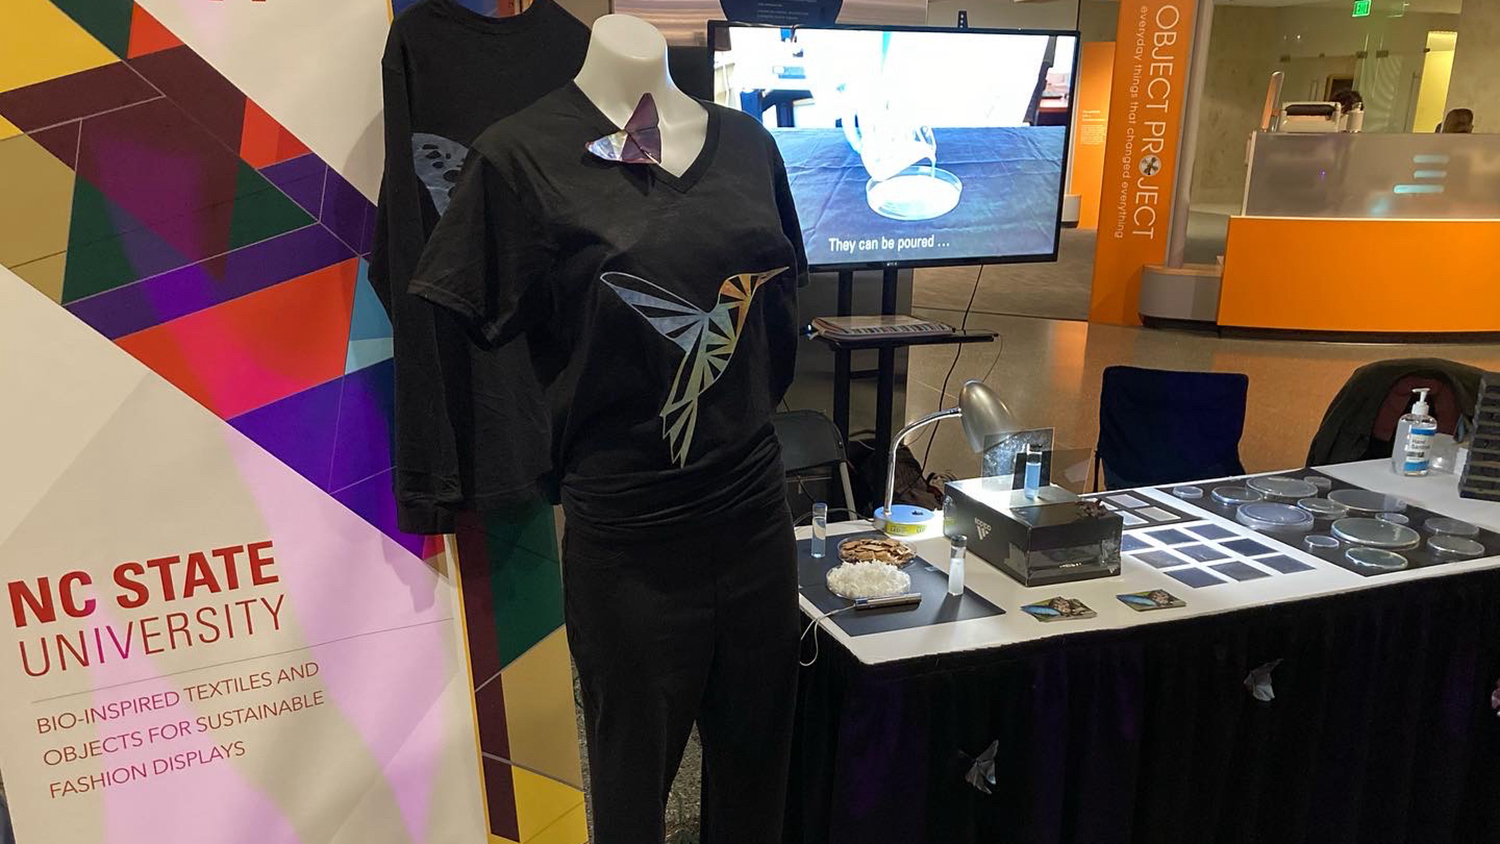 A table display showing a t-shirt with an iridescent hummingbird design - Bio-Inspired Textiles Promote Sustainable Fashion - College of Natural Resources News - NC State University